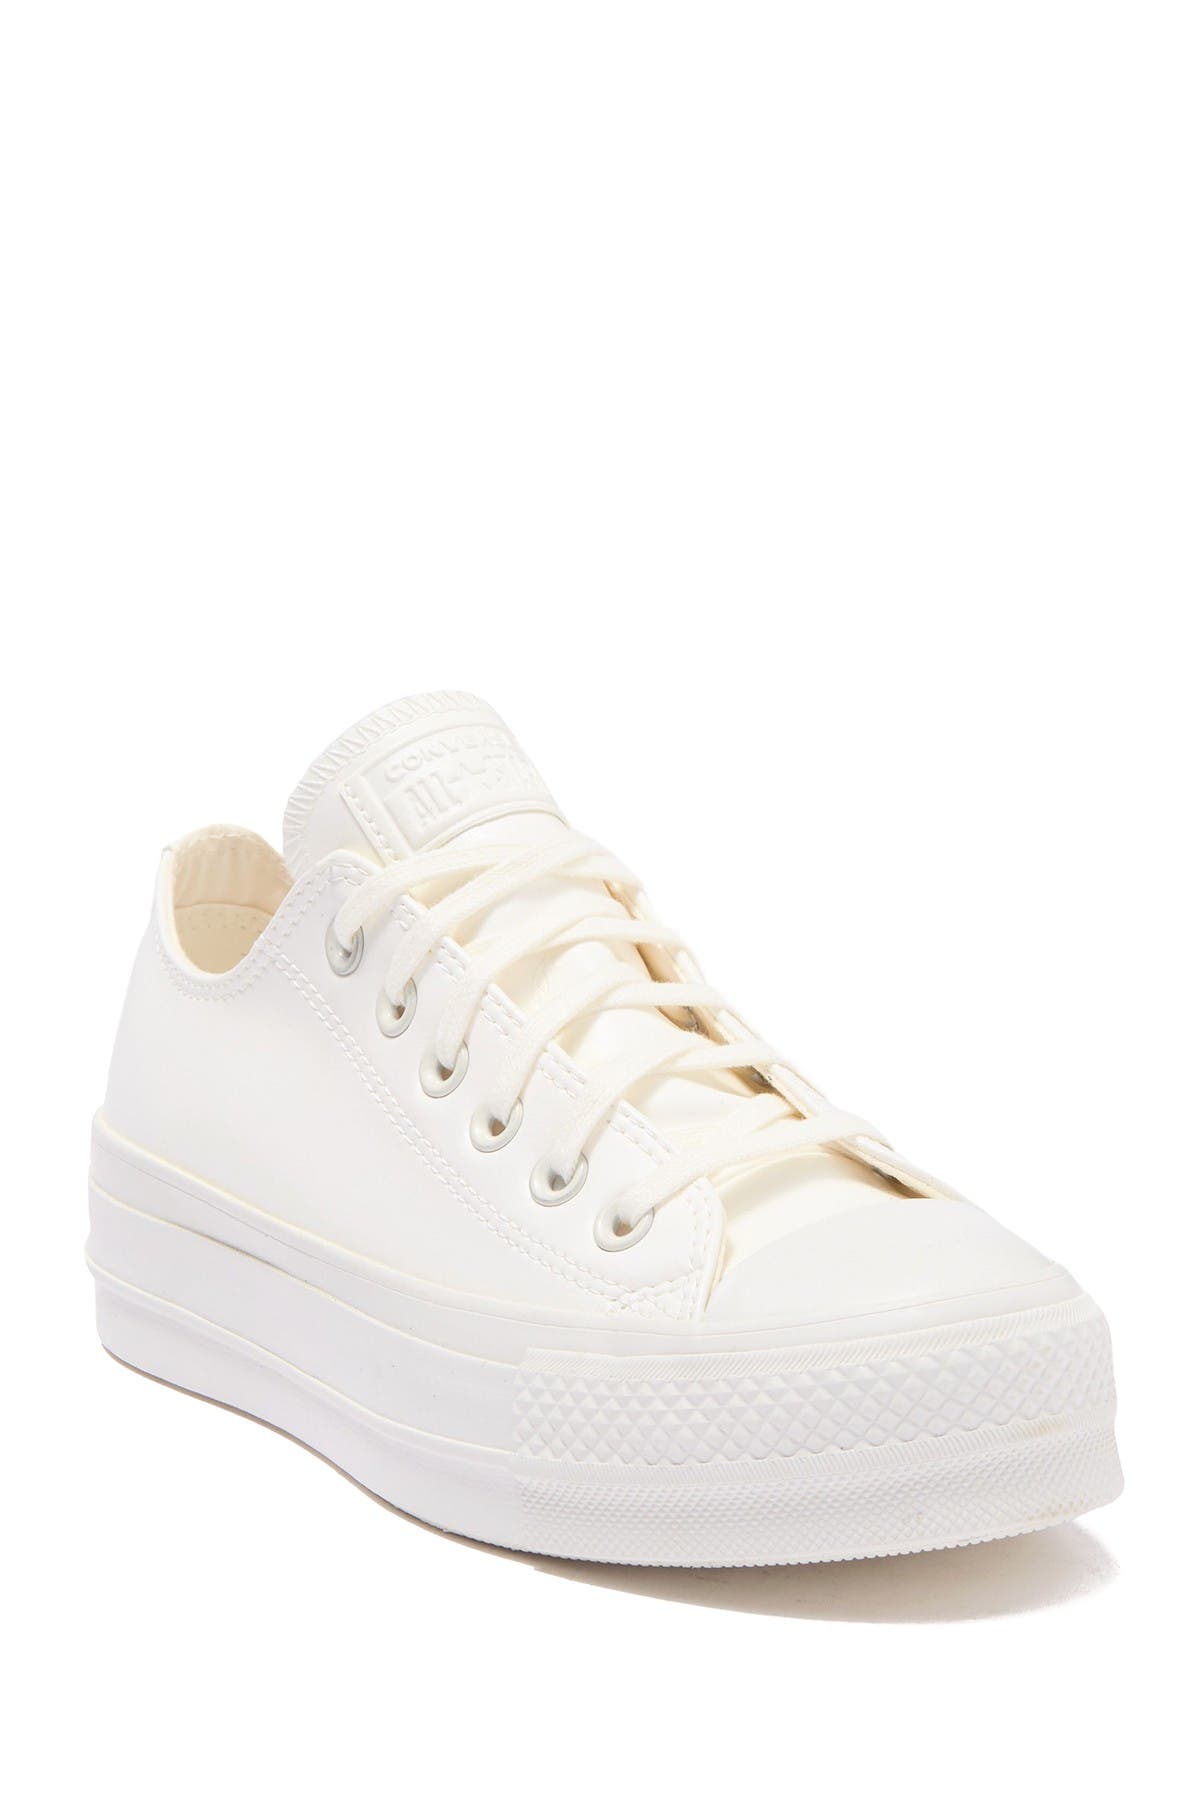 nordstrom rack converse shoes